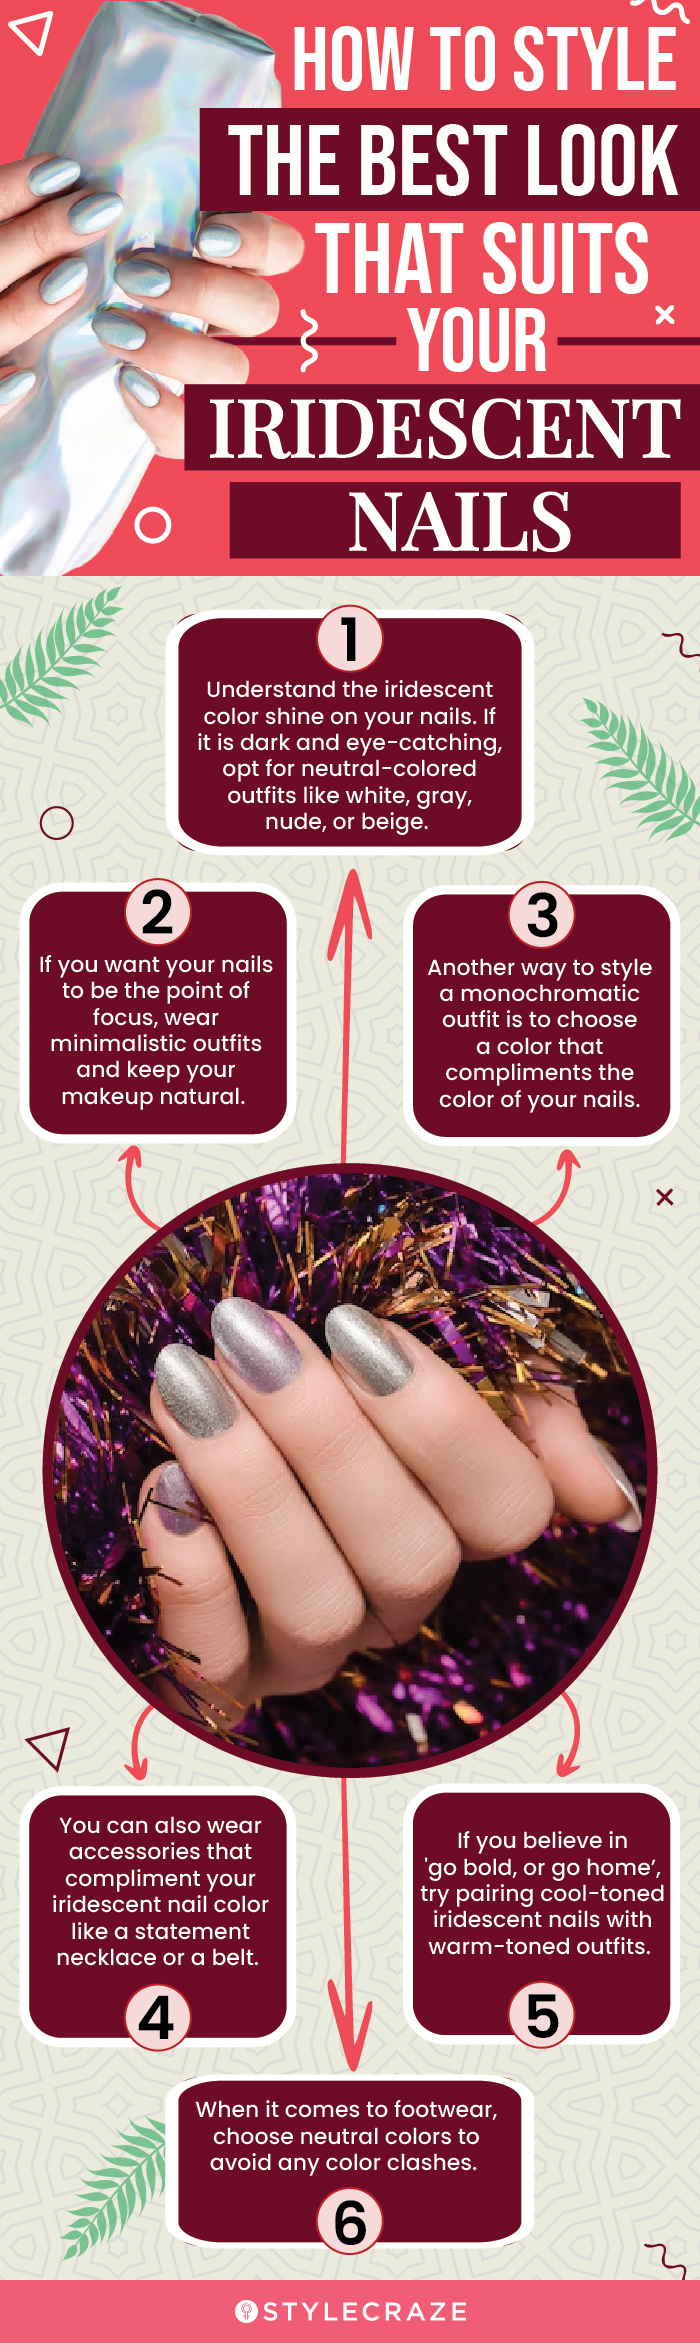 How To Style The Best Look That Suits Your Iridescent Nails (infographic)